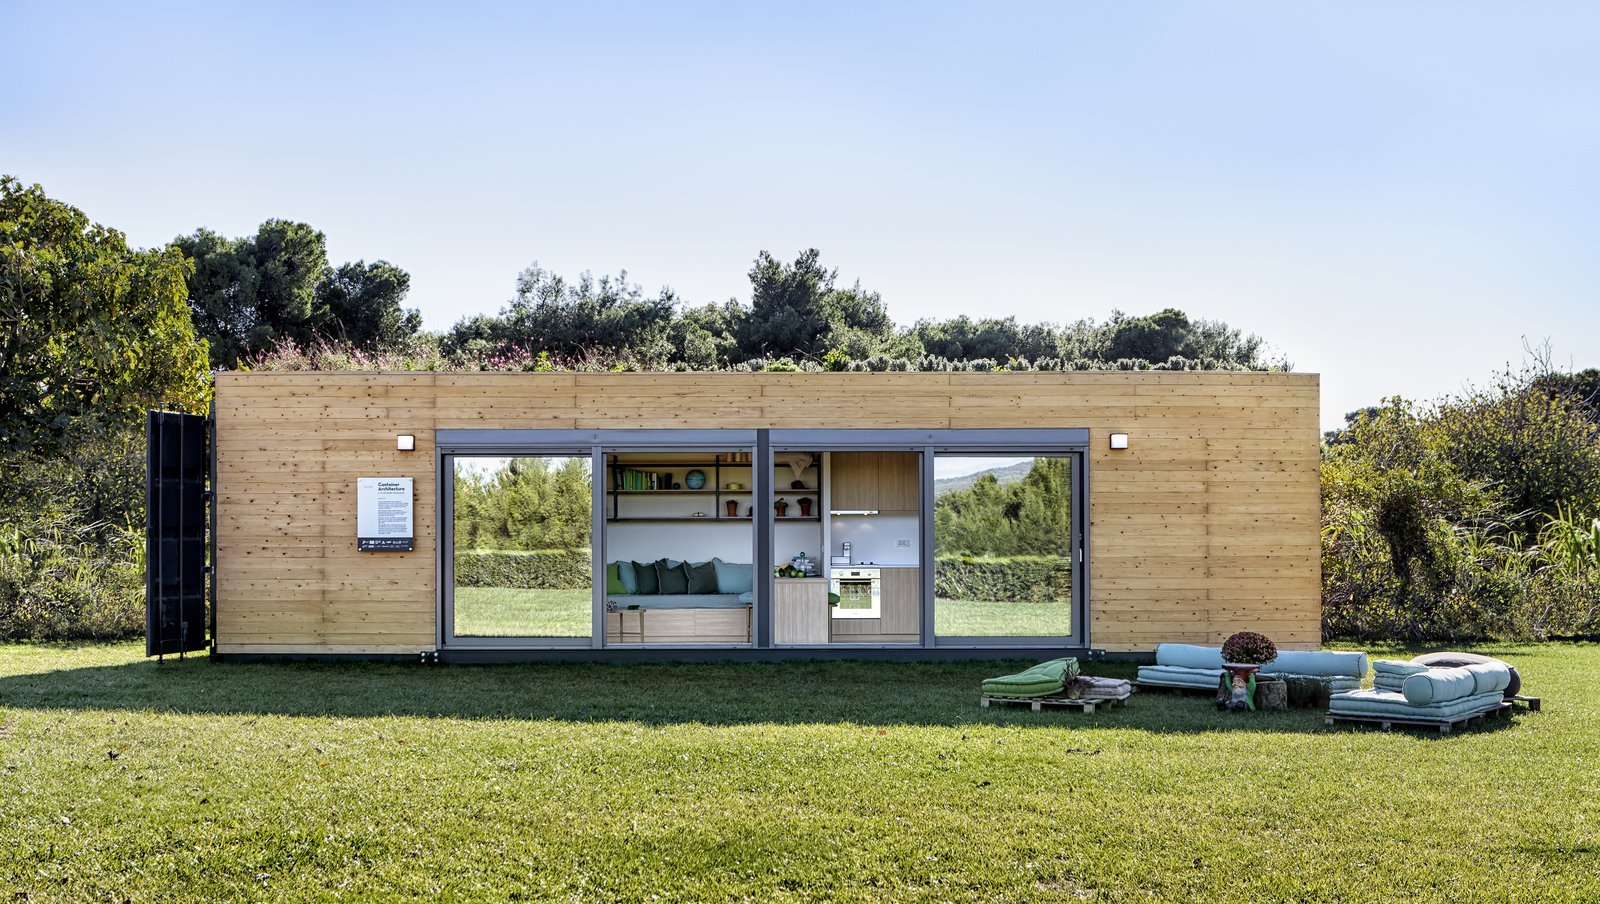 This Eco-Friendly Shipping Container Is the Ultimate Nomadic Dwelling